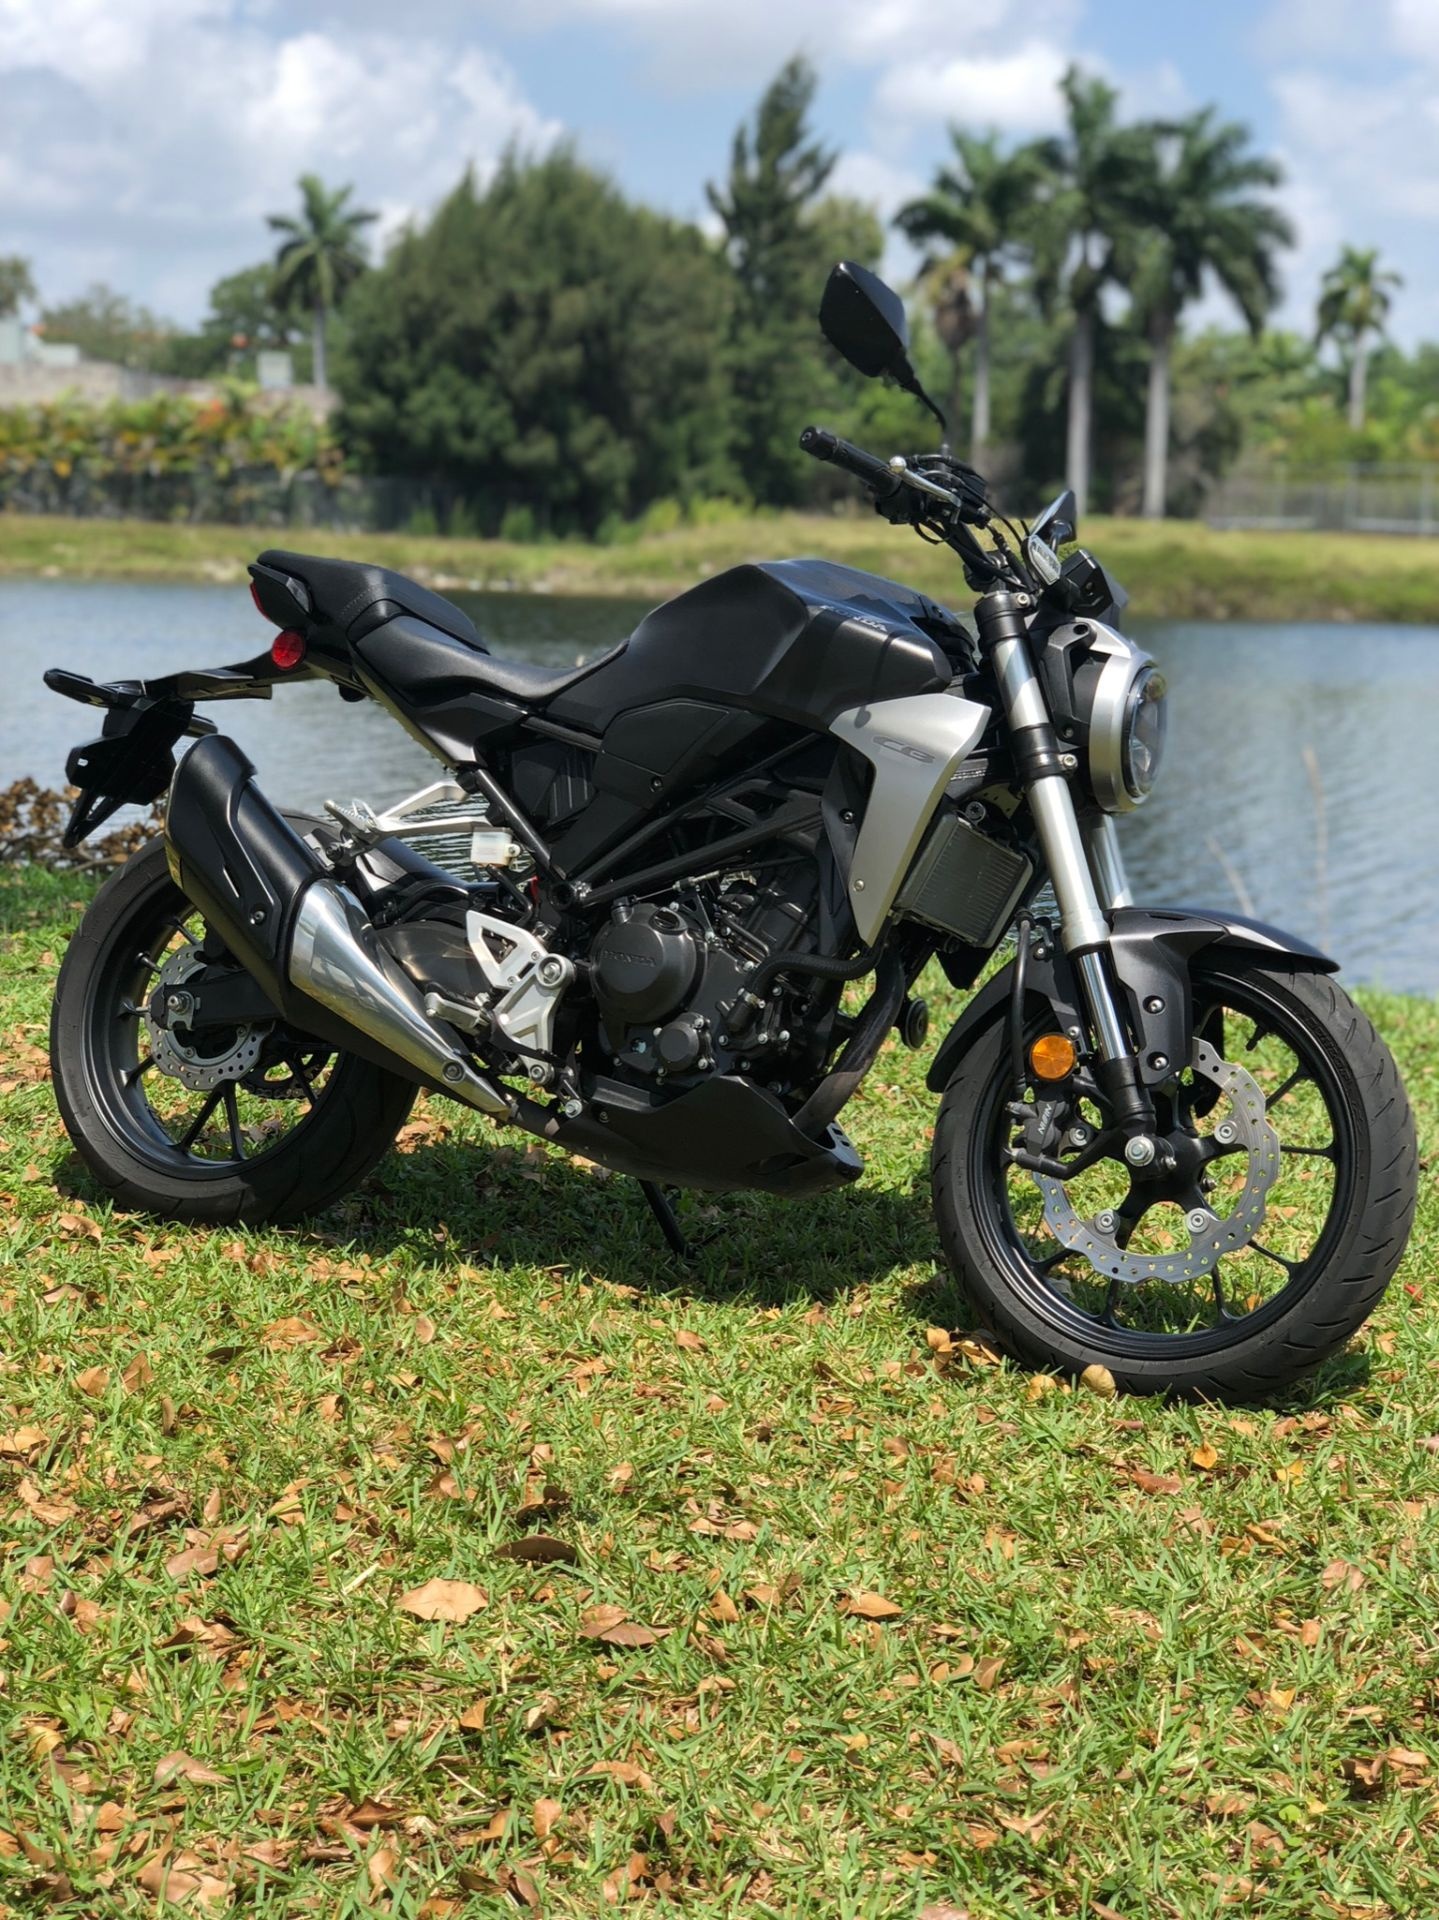 Honda CB300R, Certified pre-owned, Metallic gray color, Reliable and stylish, 1440x1920 HD Phone